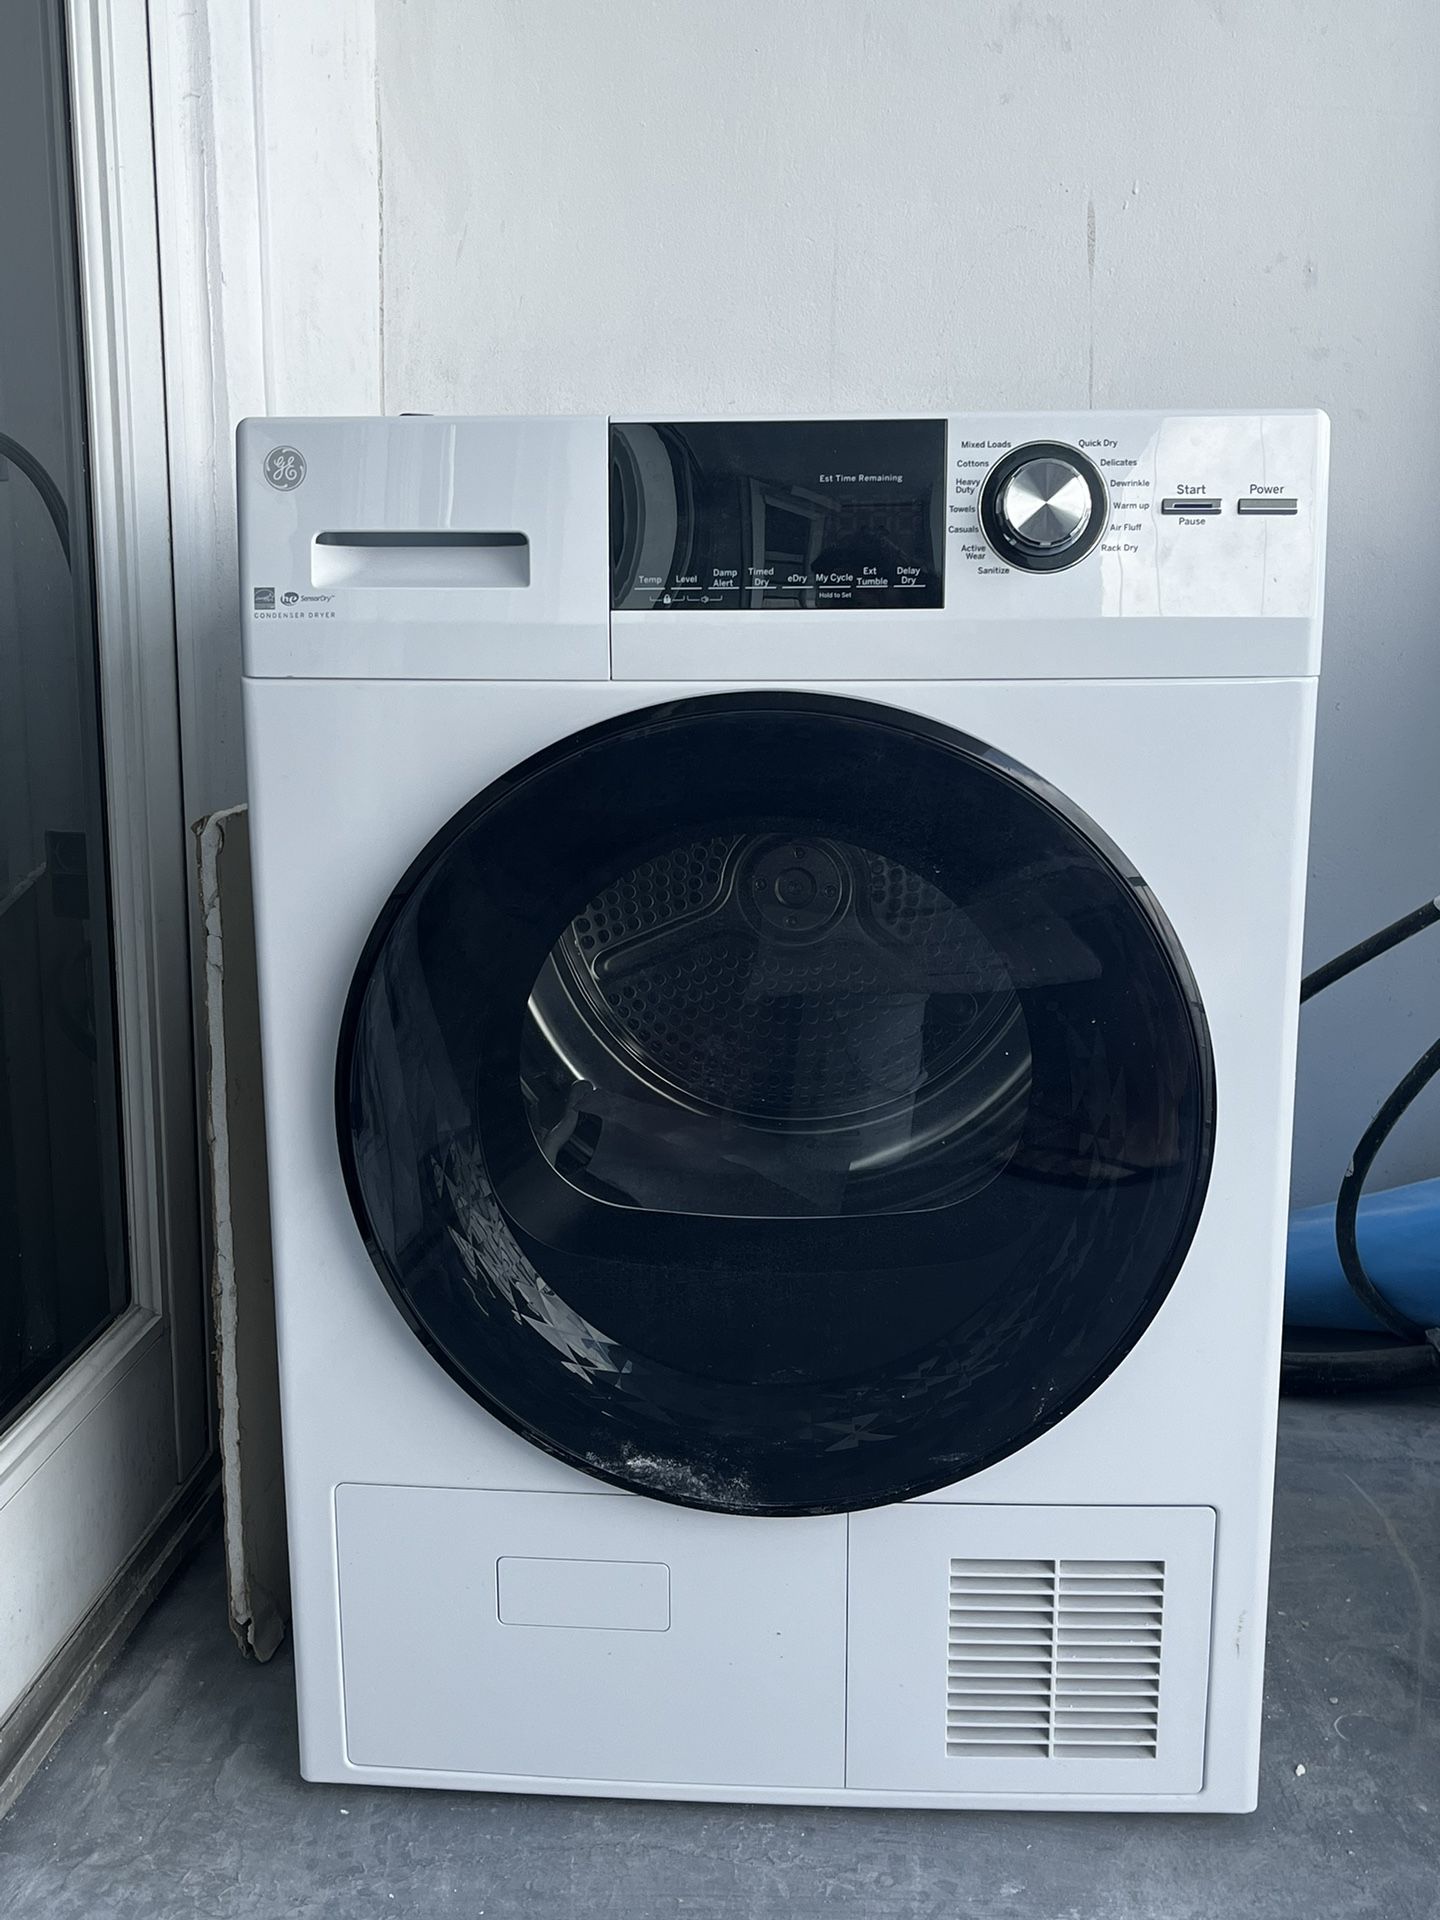 GE Stackable set washer and dryer (bought a year ago) - ventless